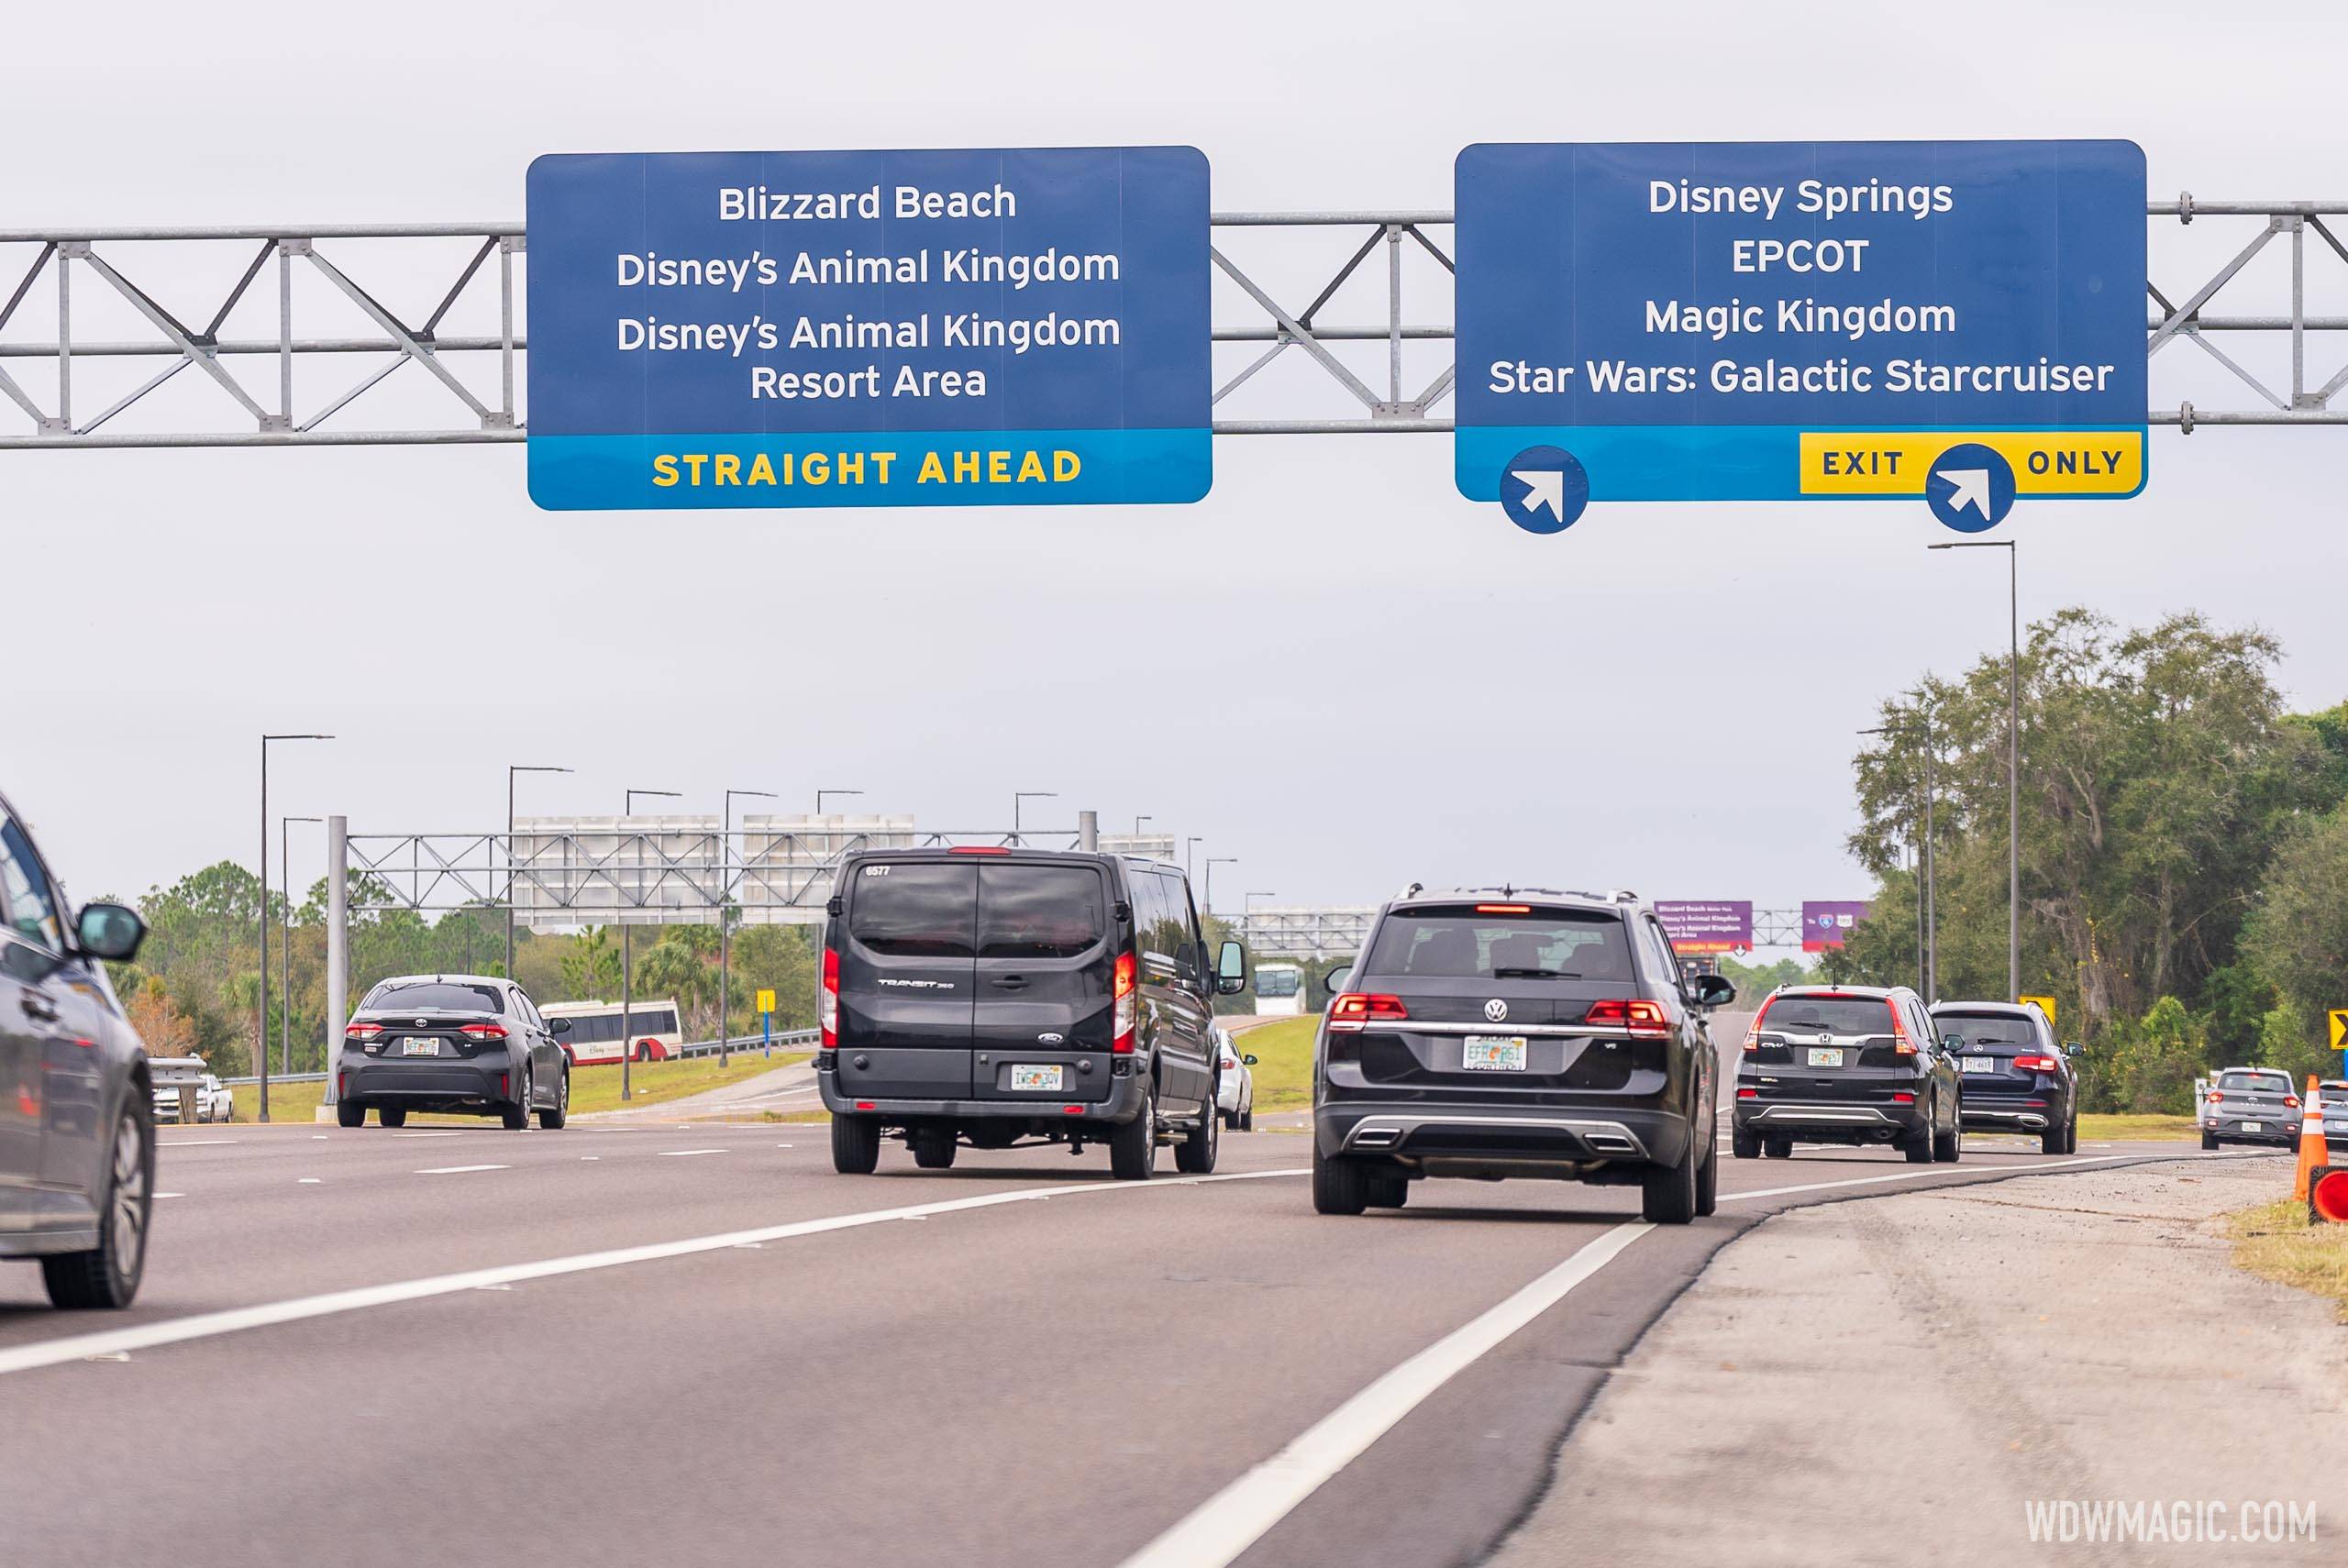 Walt Disney World's iconic purple road signs are being replaced with an all-new look